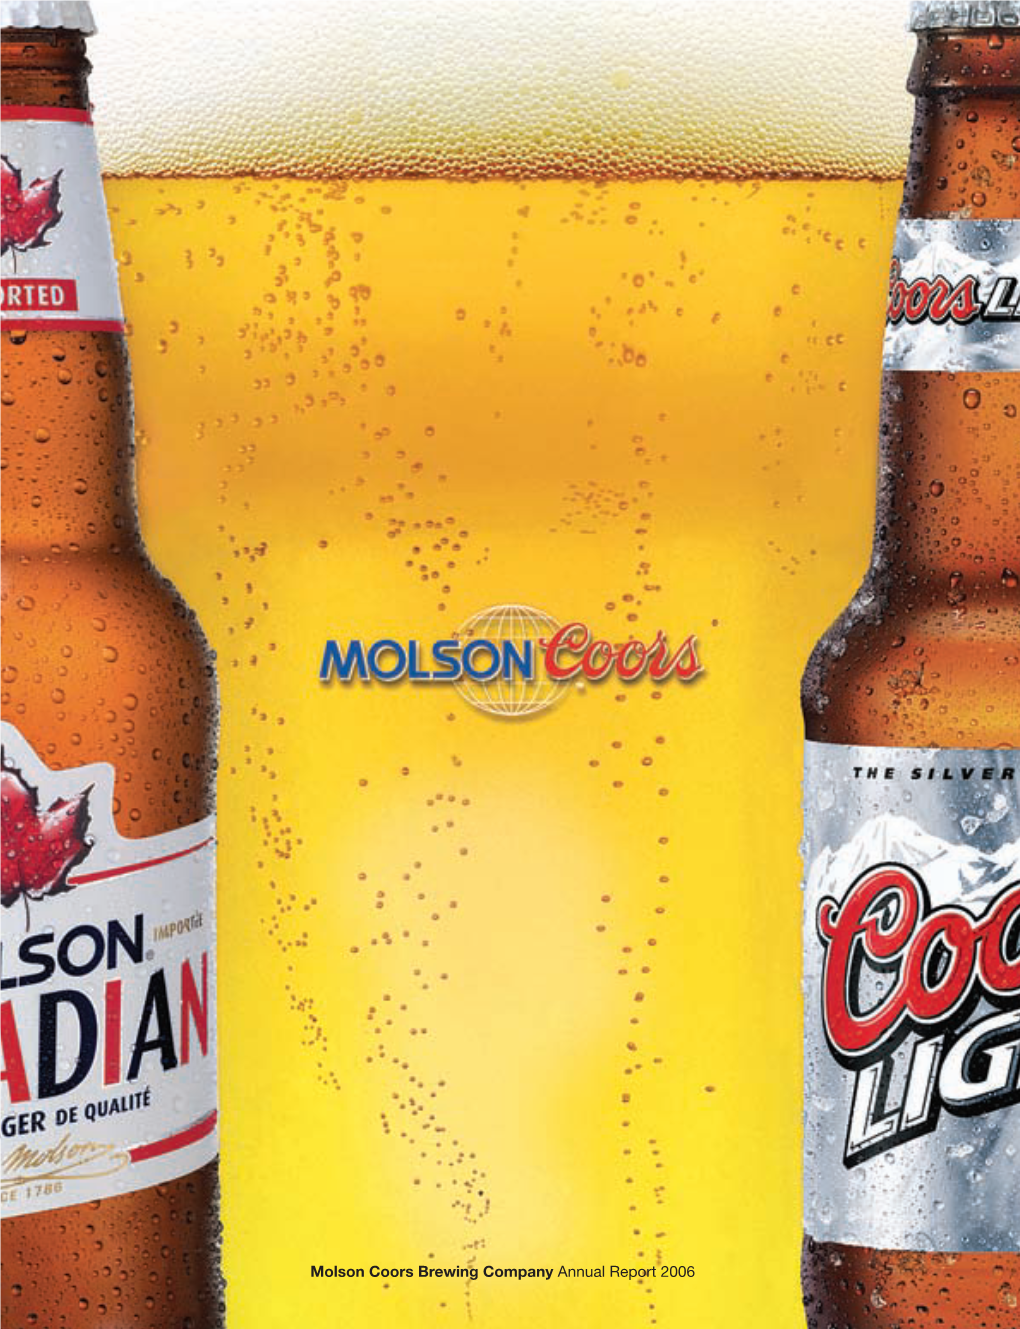 Molson Coors Brewing Company Annual Report 2006